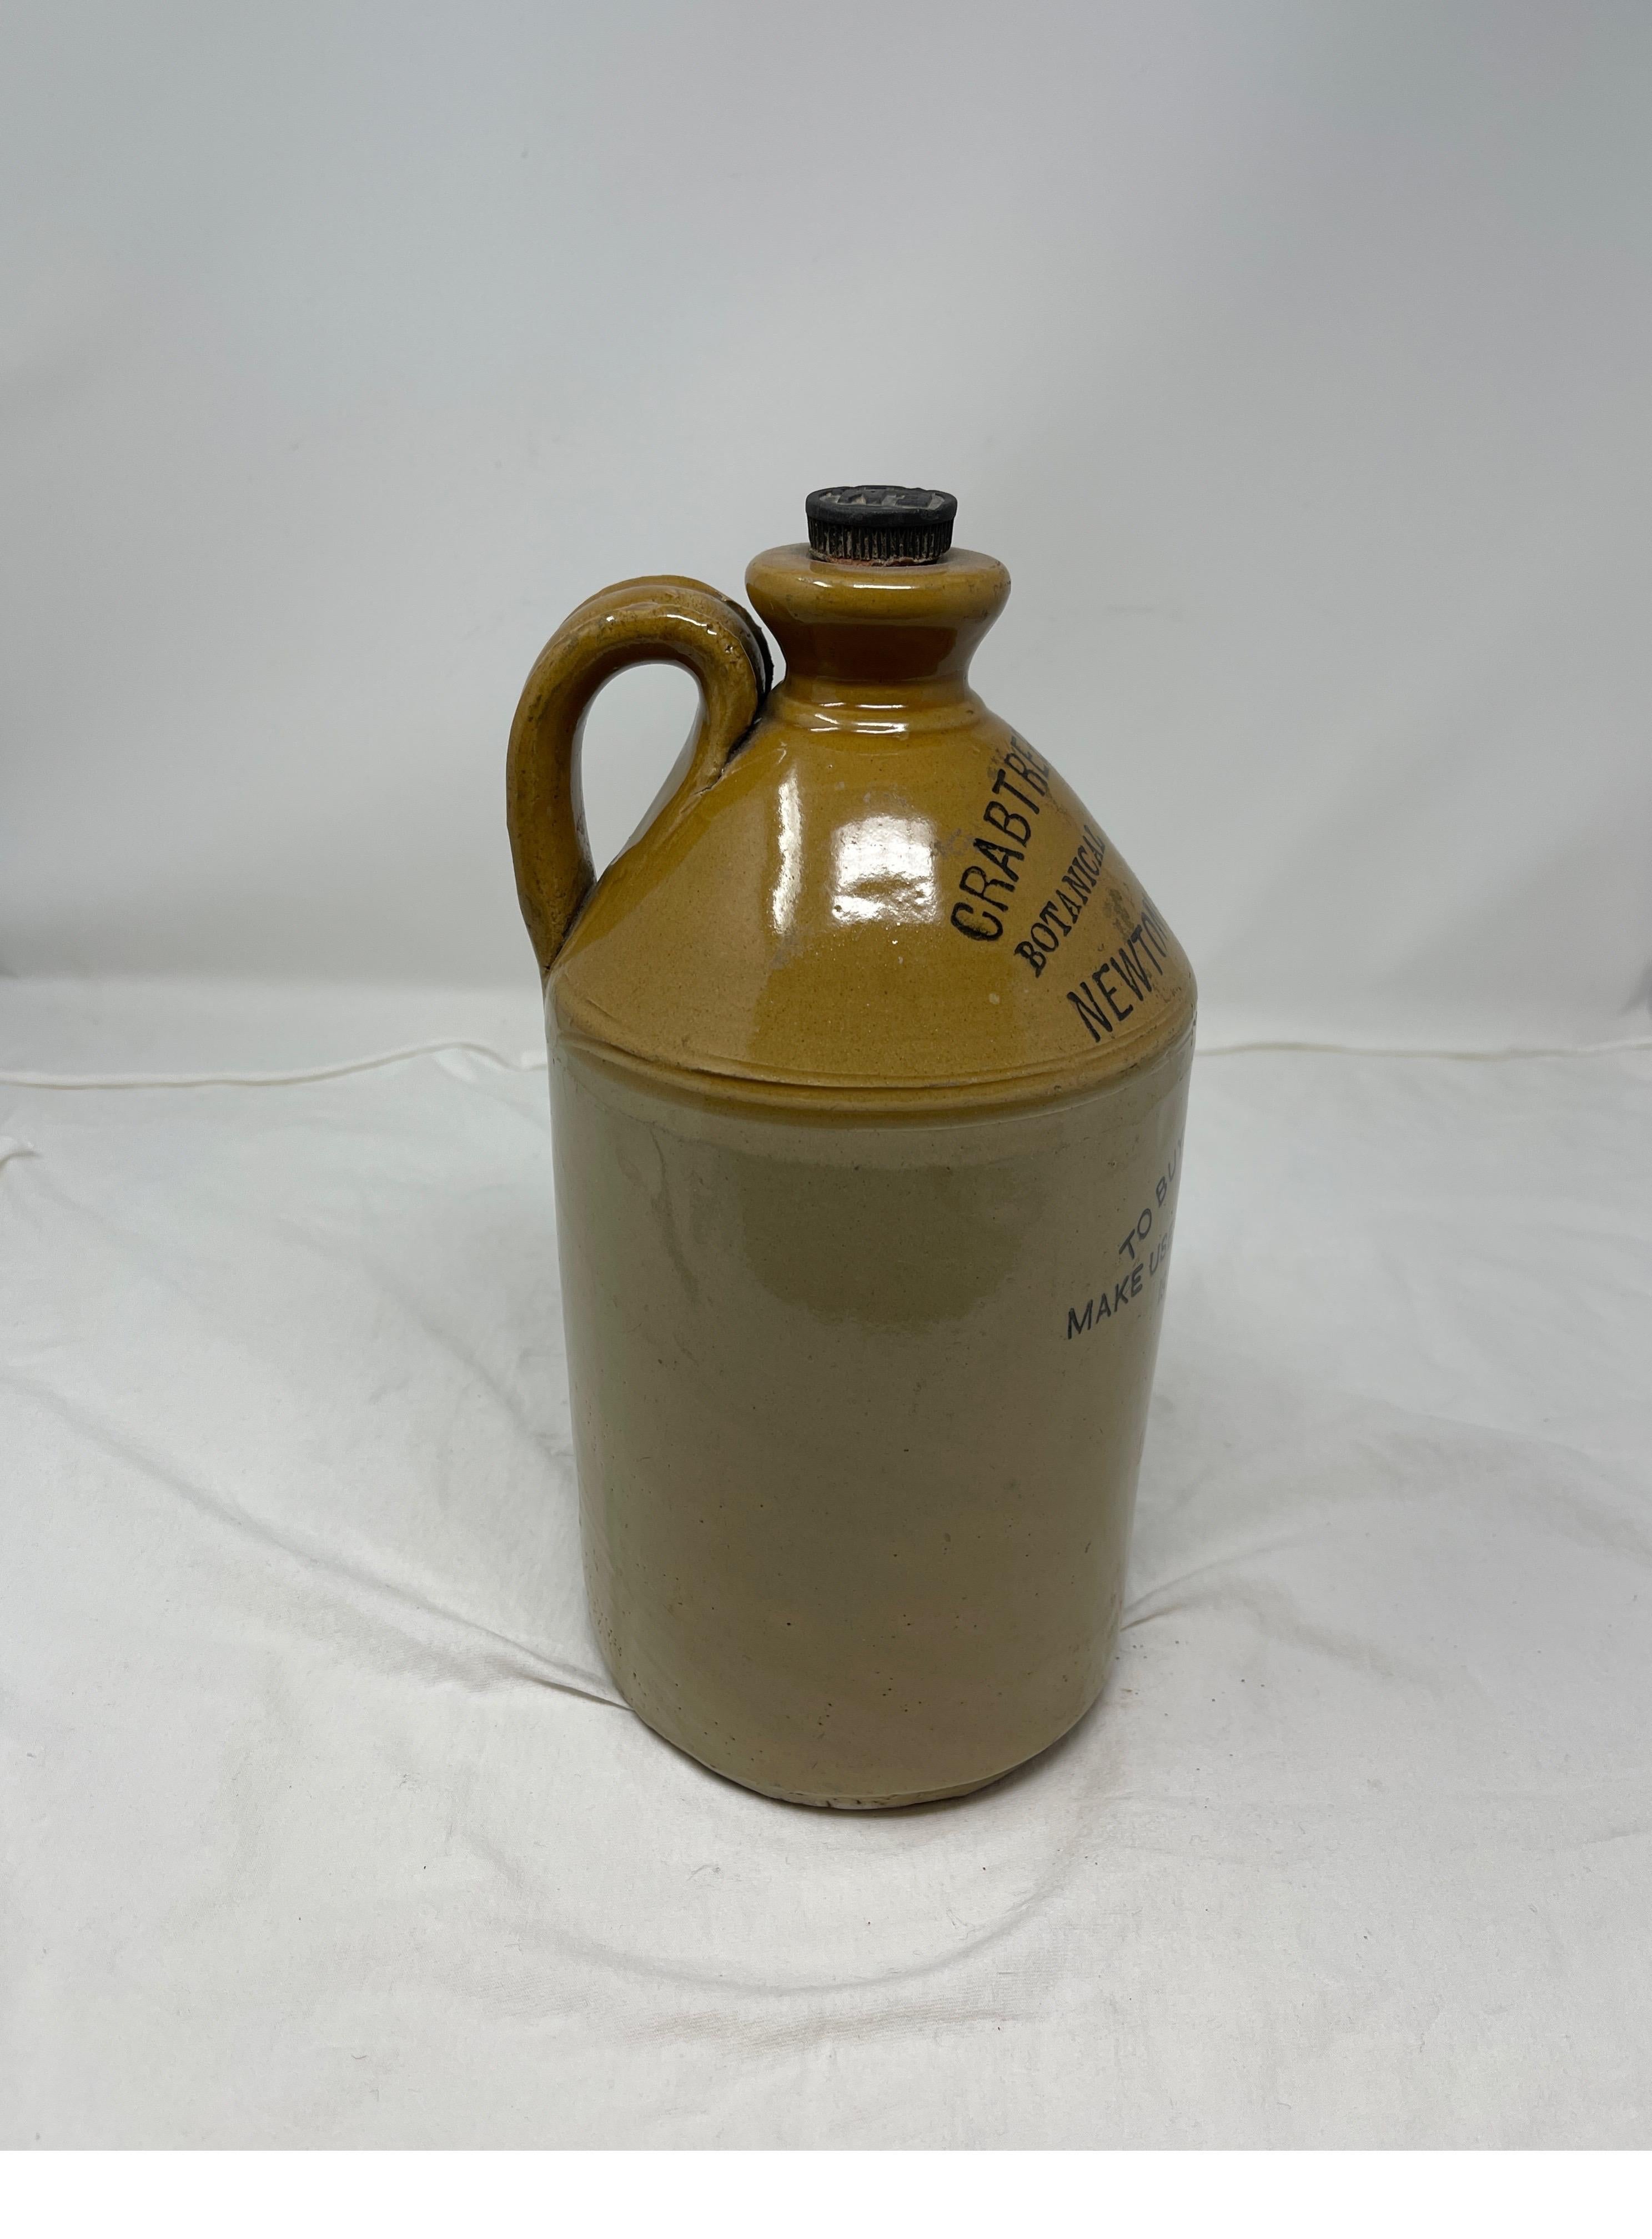 Hand-thrown English glazed two-tone stoneware used for spirits, liquor, or wine pottery jugs with handles. This jug is marked 